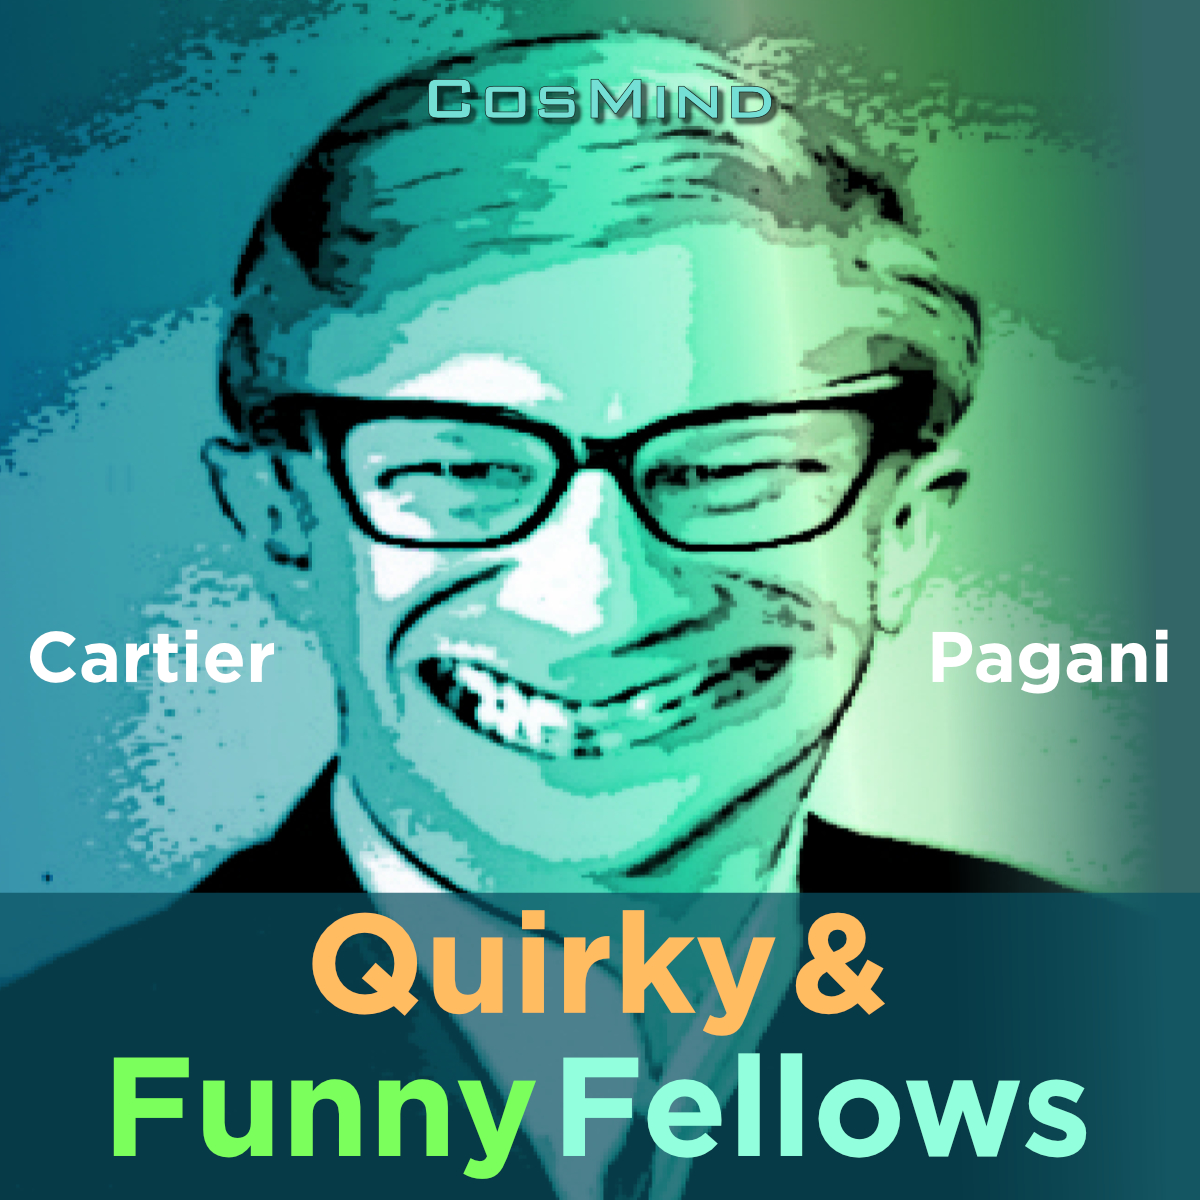 Quirky & Funny Fellows